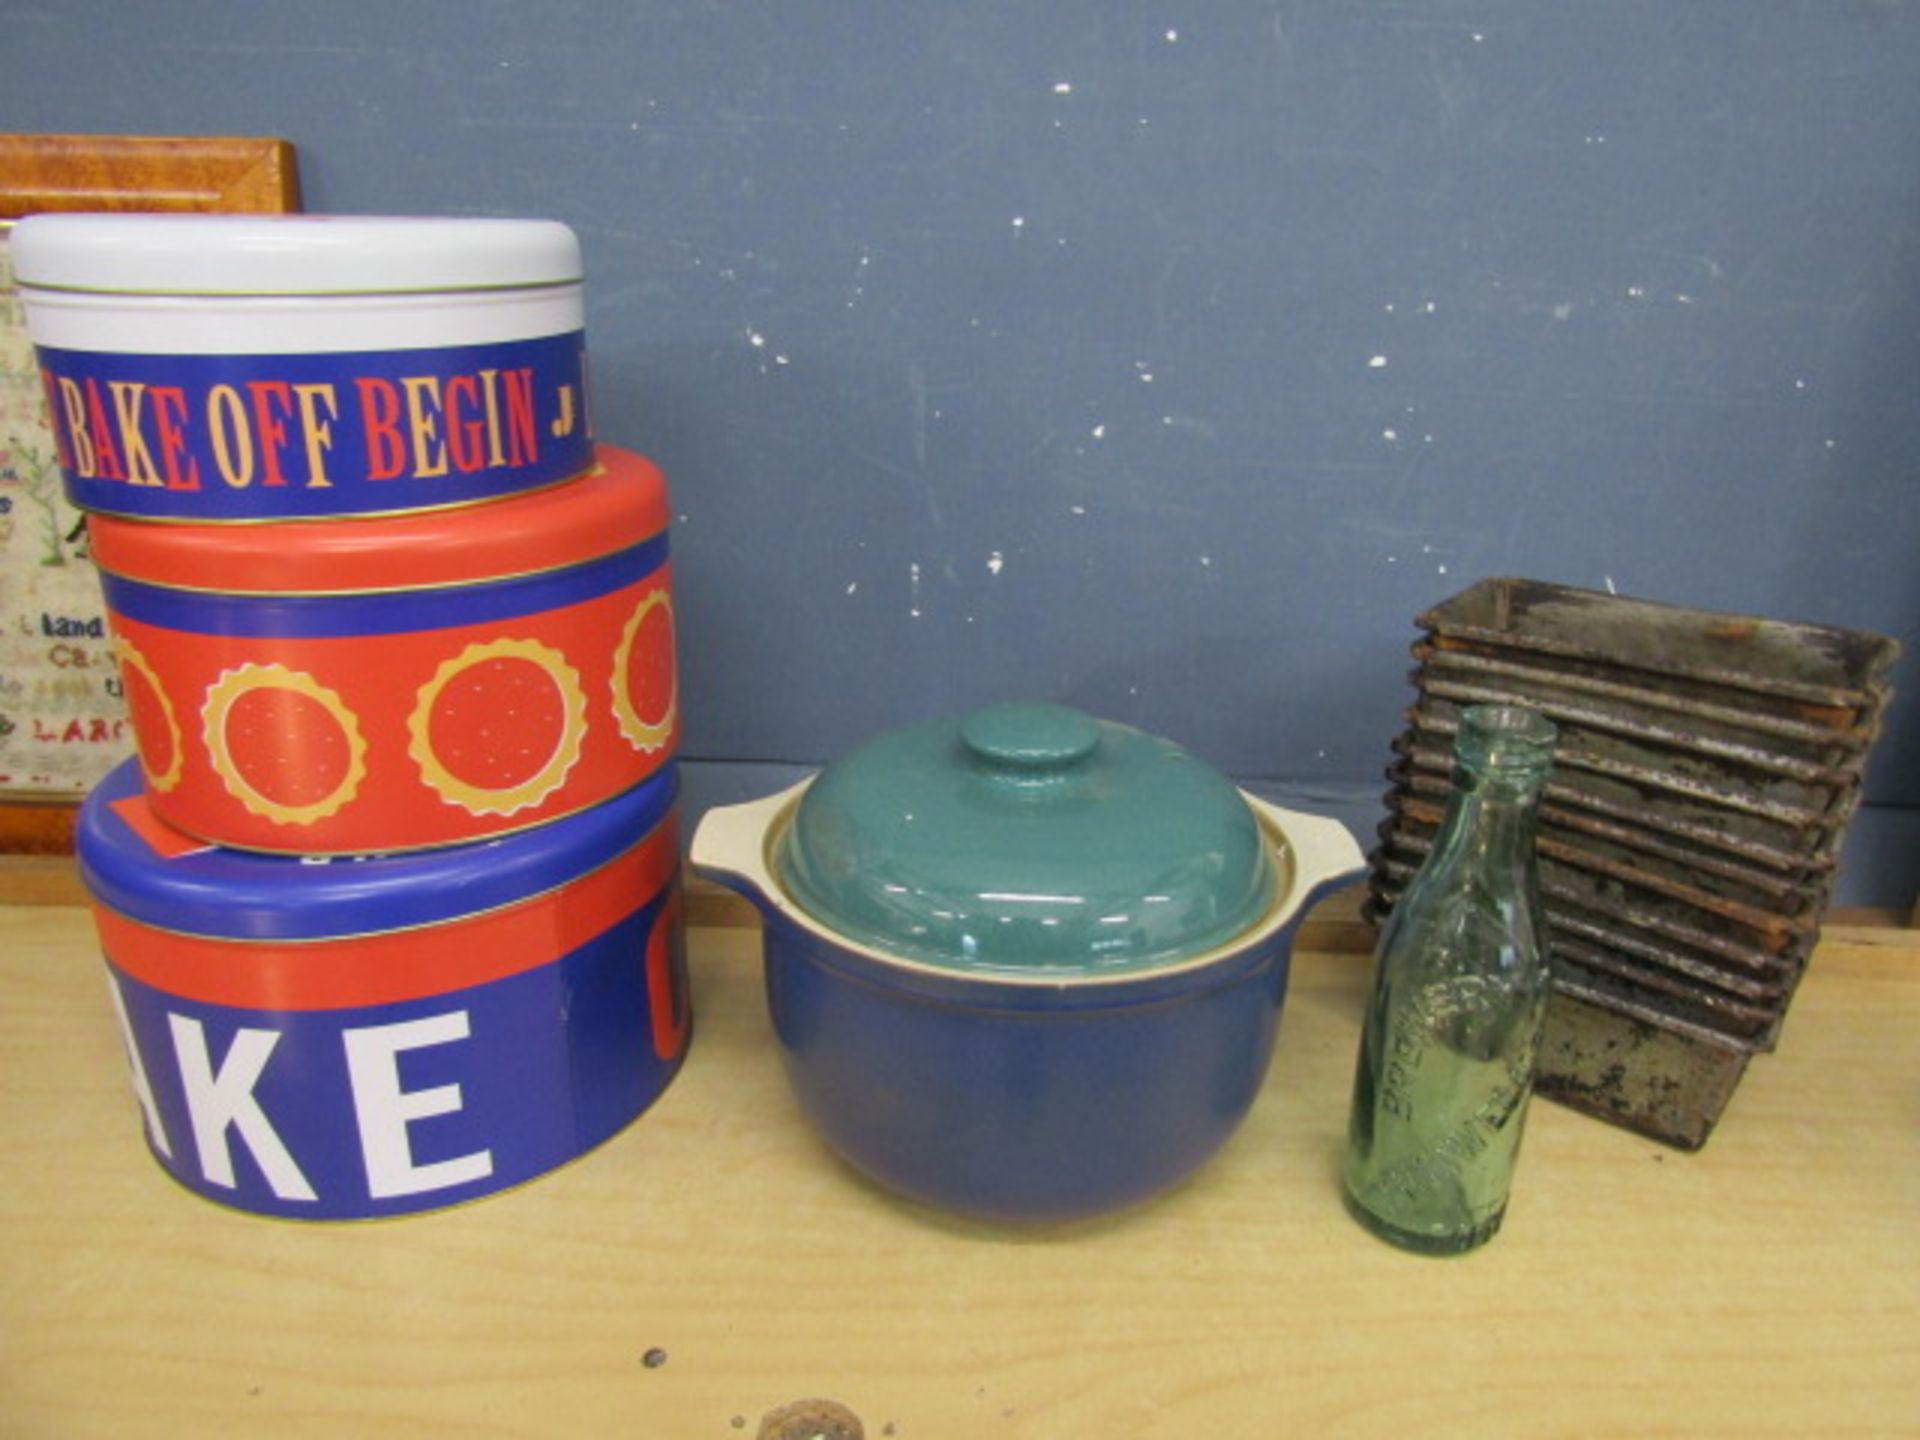 Macadams brass thermometer, Jamie Oliver cake tins, casserole pot, vintage bottle and cake tins